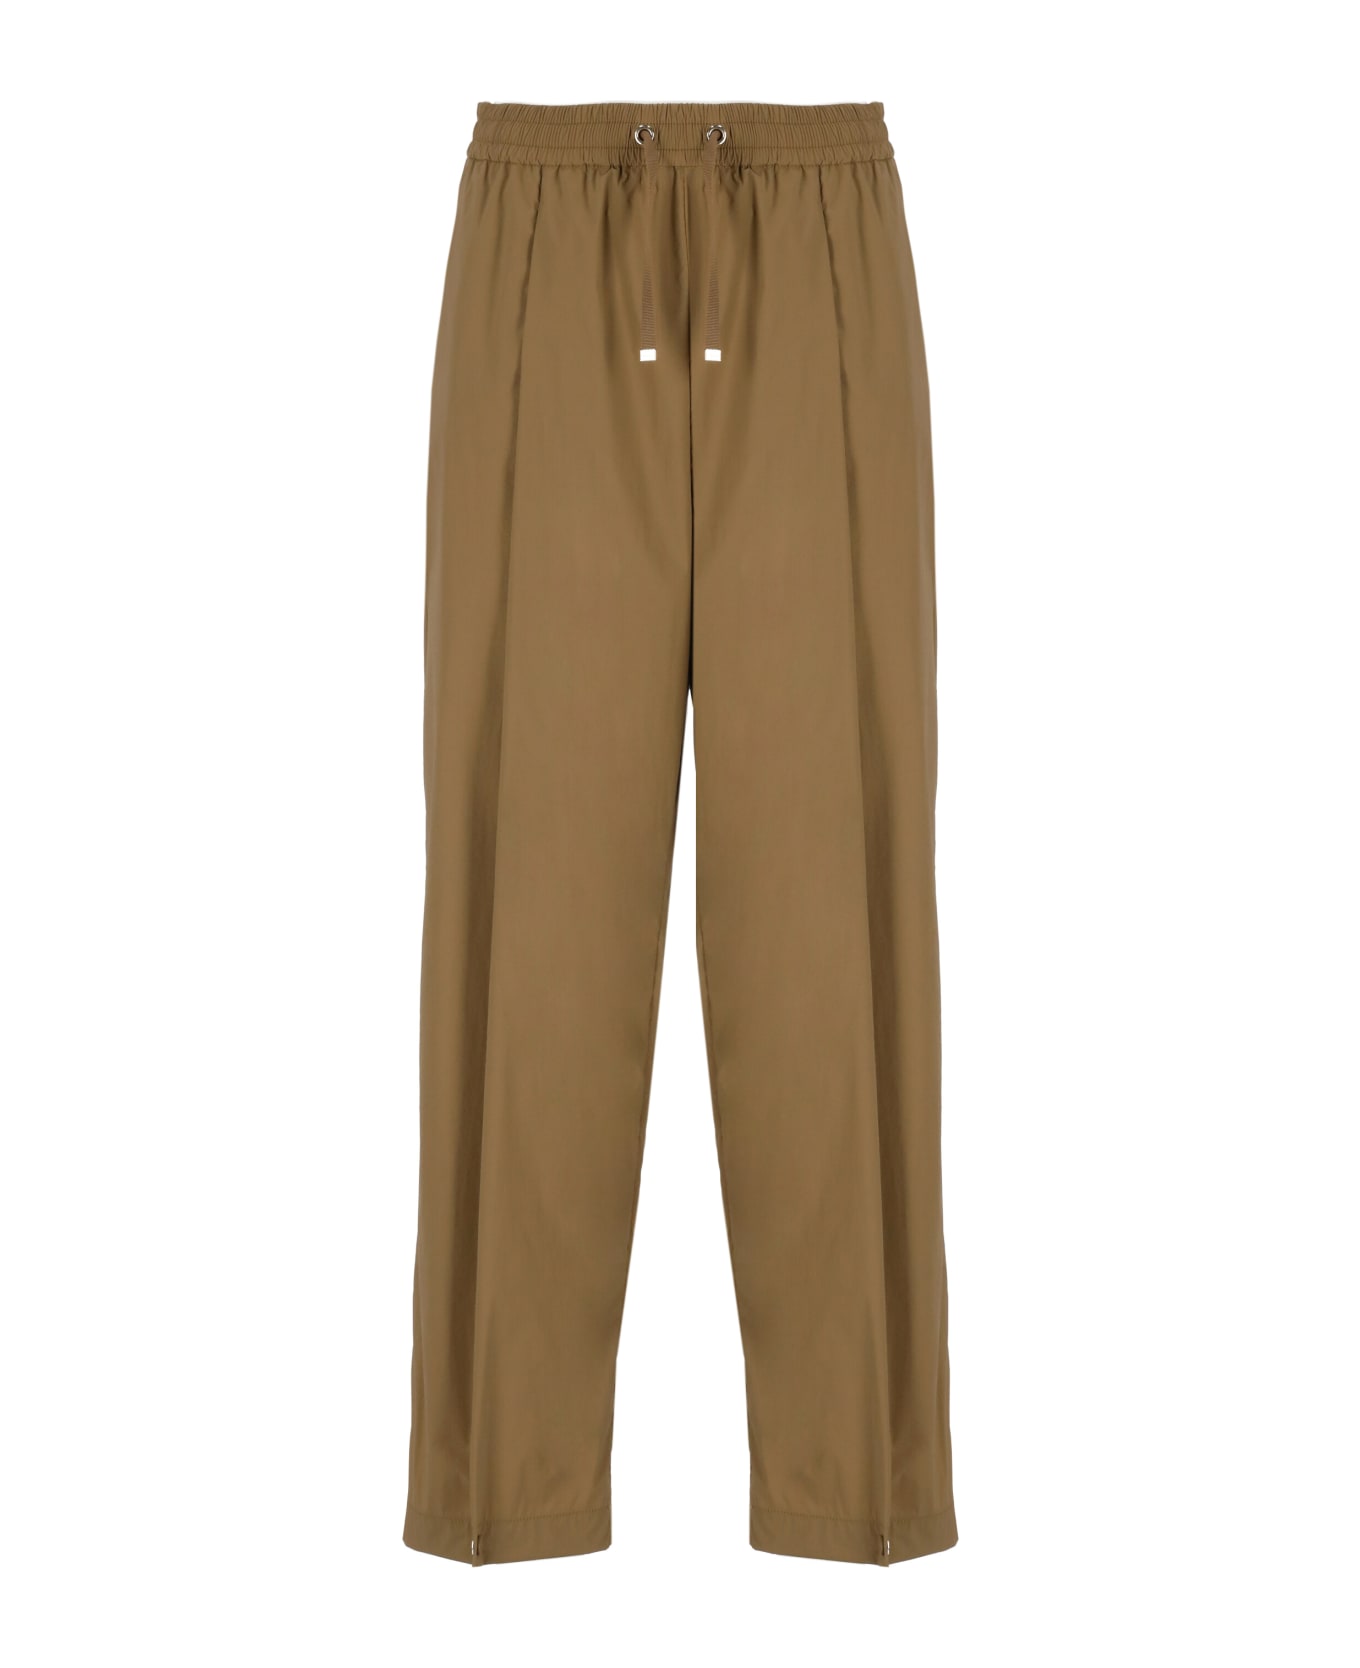 Herno Light Nylon Stretch Trousers - Brown